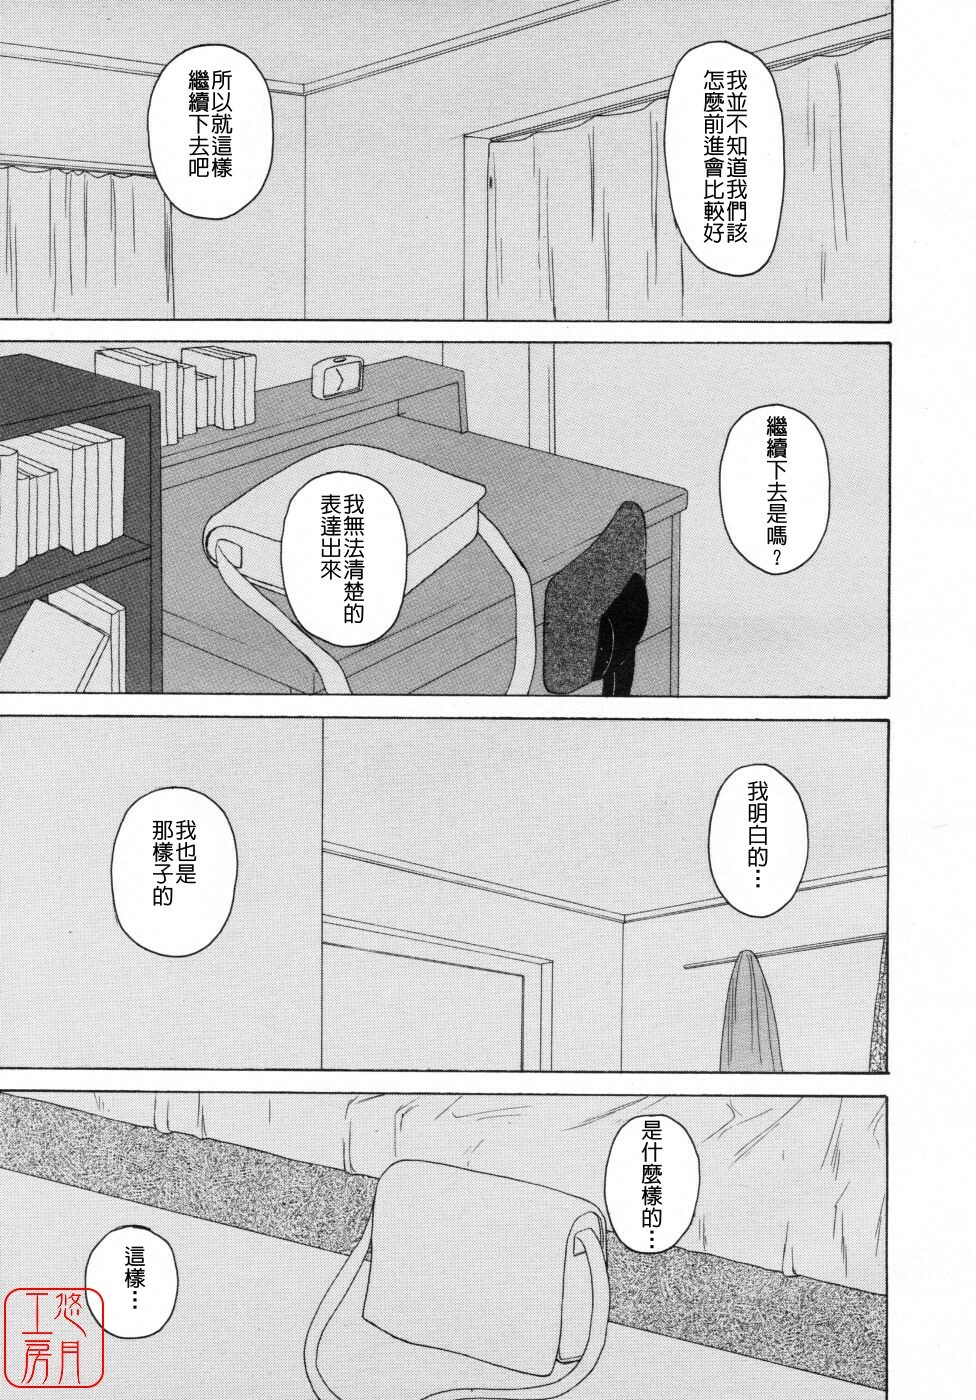 [Fuuga] Girl Friend 2 (Chinese) page 37 full